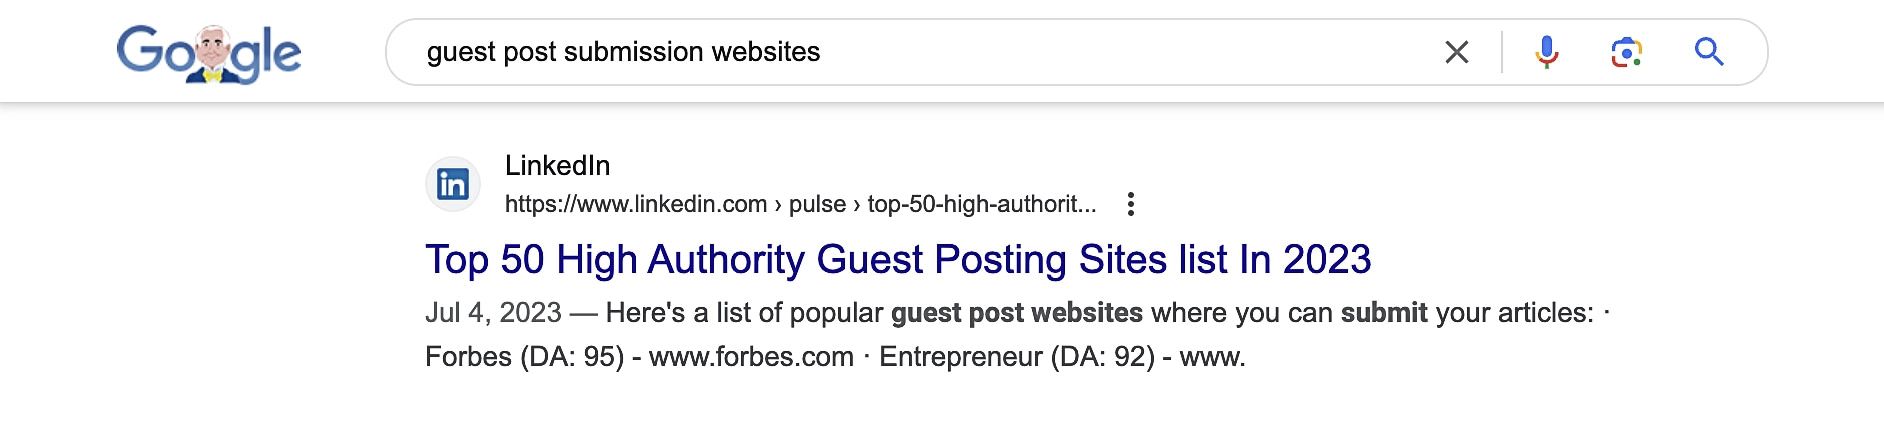 A search for blogs that accept guest post submissions.